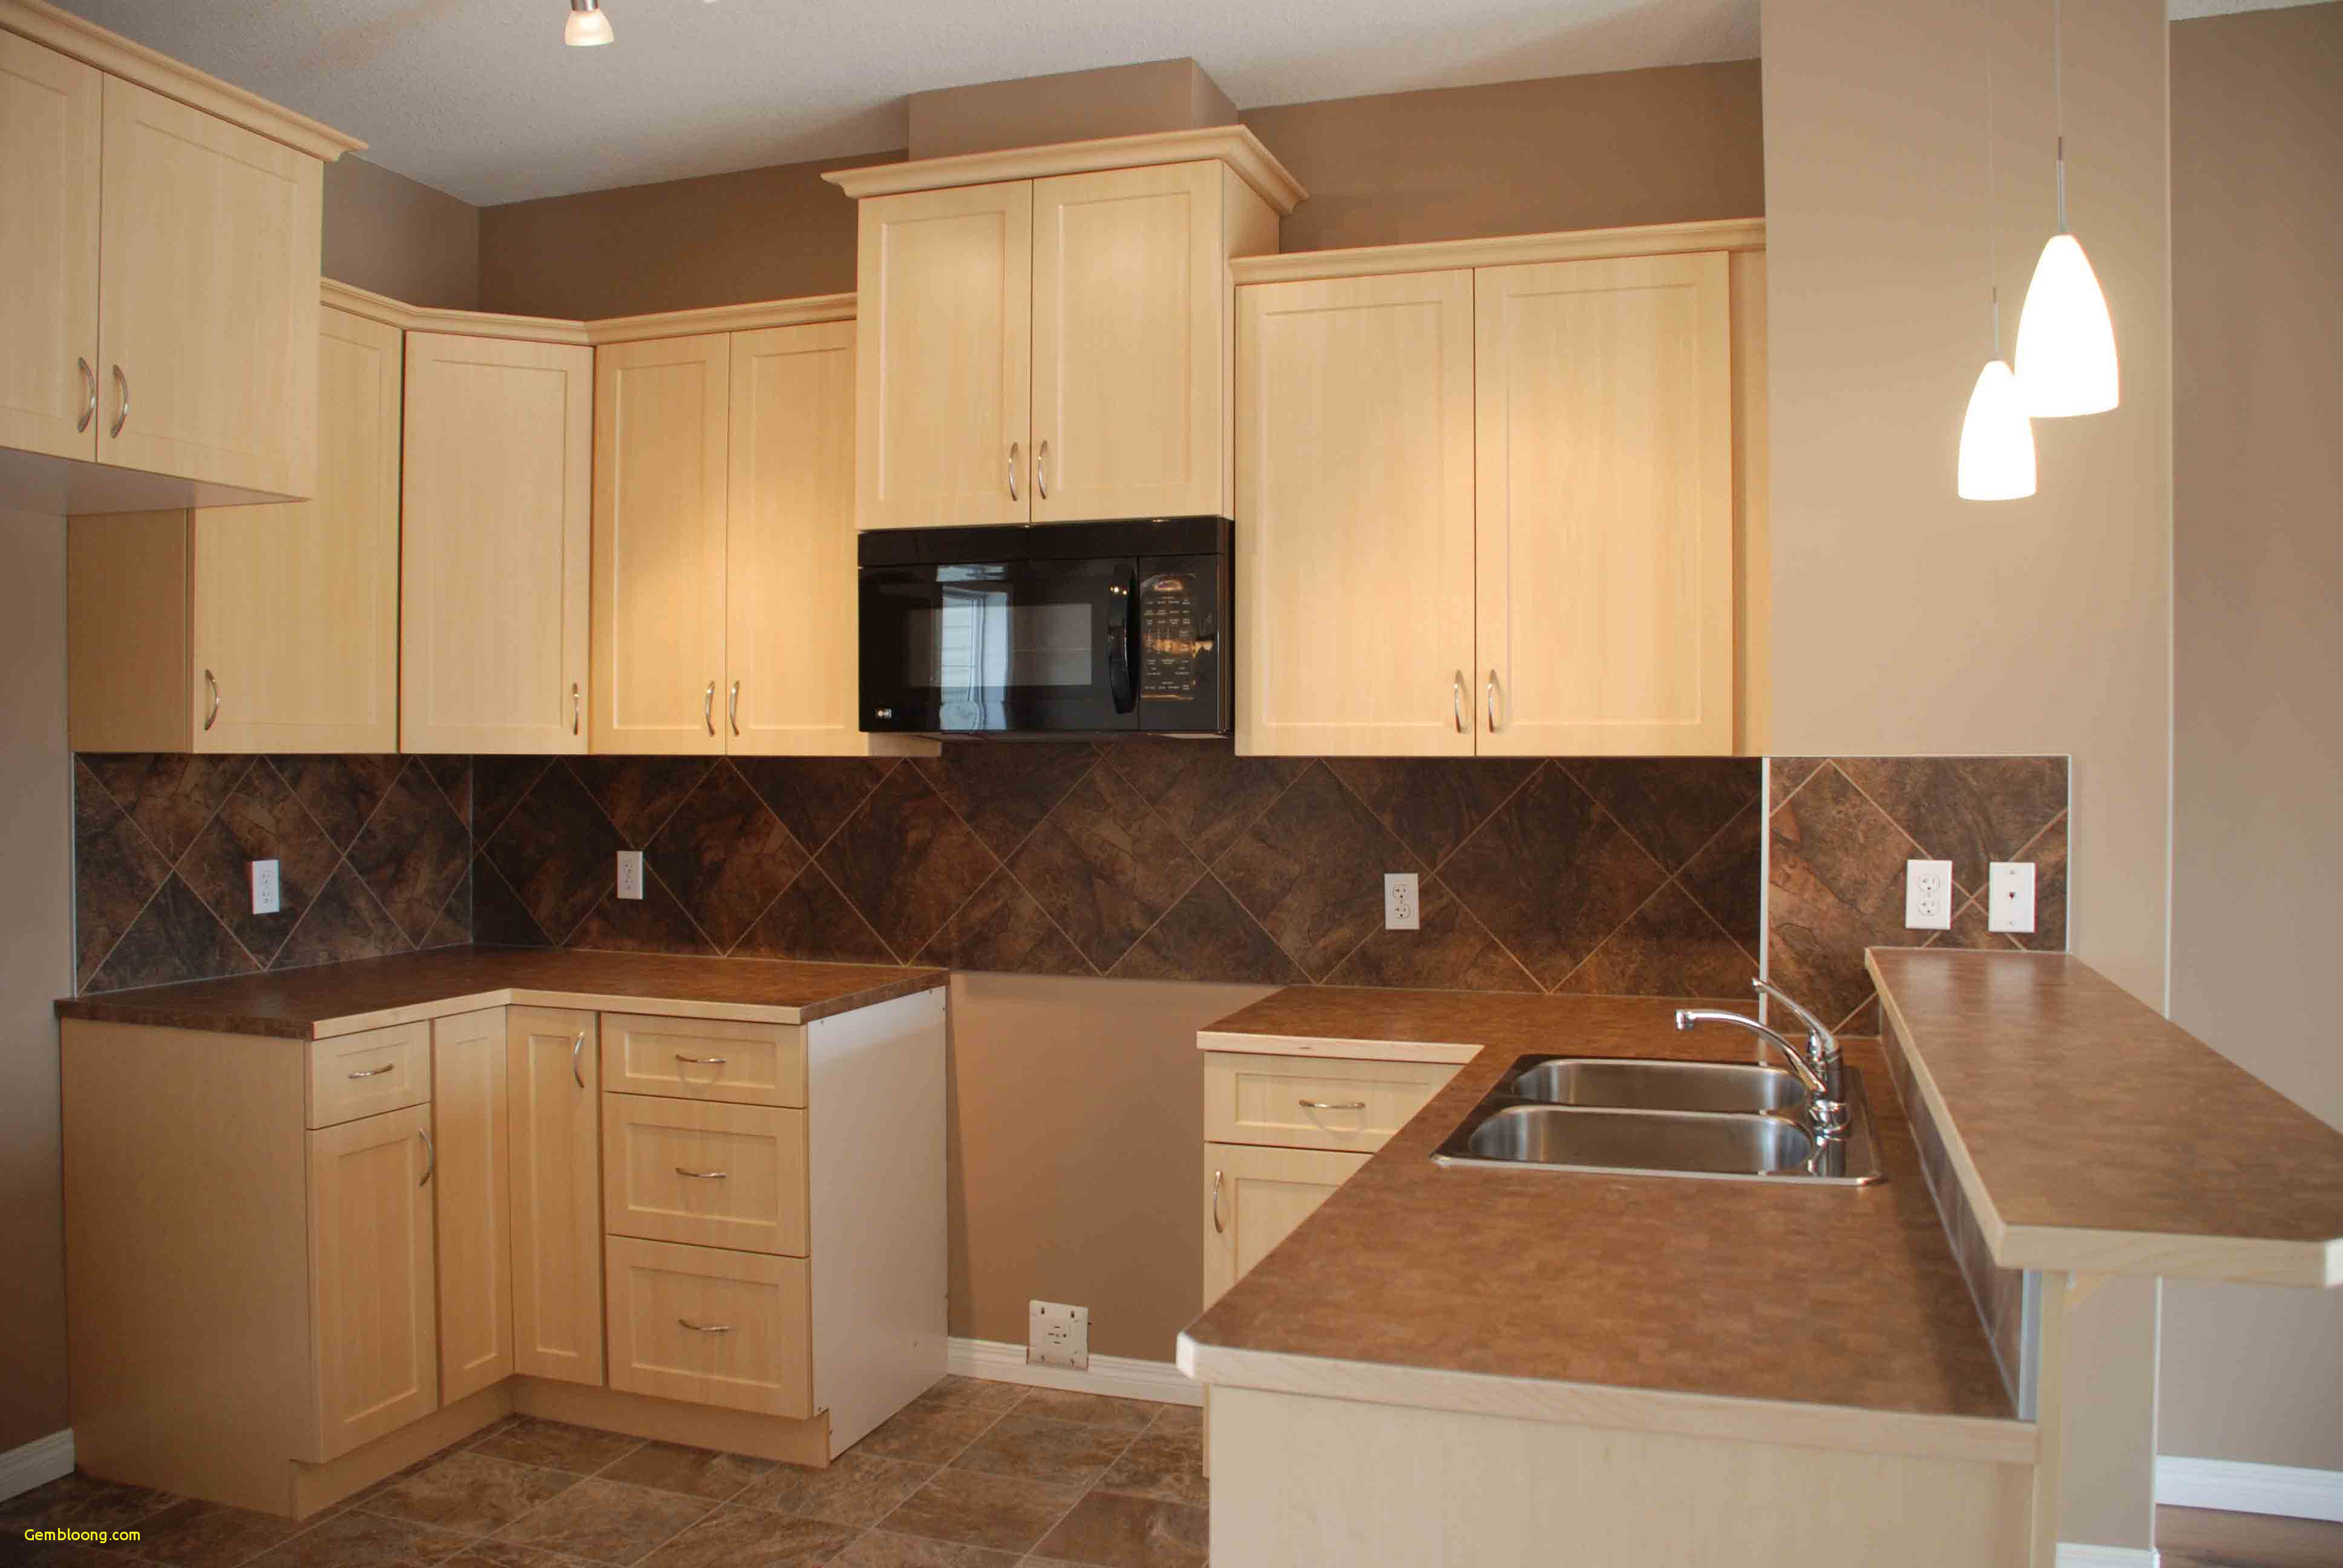 Used Kitchen Cabinets Lovely Beauty Of Minimalist Used Kitchen Cabinets Sale Of Used Kitchen Cabinets 